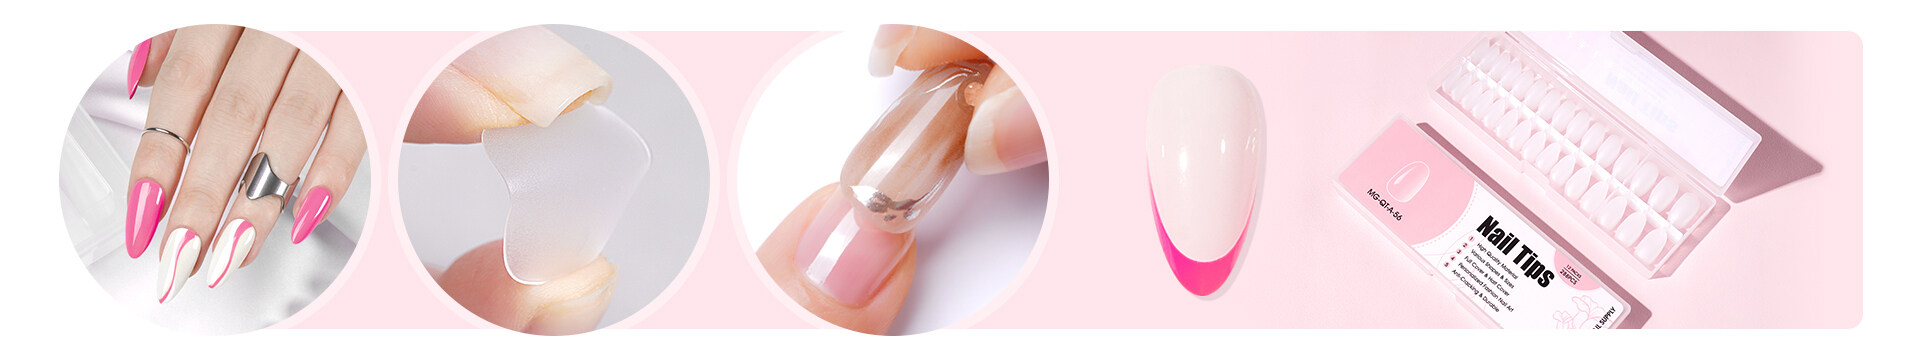 Pre Designed Nail Tips Wholesale,Short Round Gel Nails,3Xl Full Cover Nail Tips